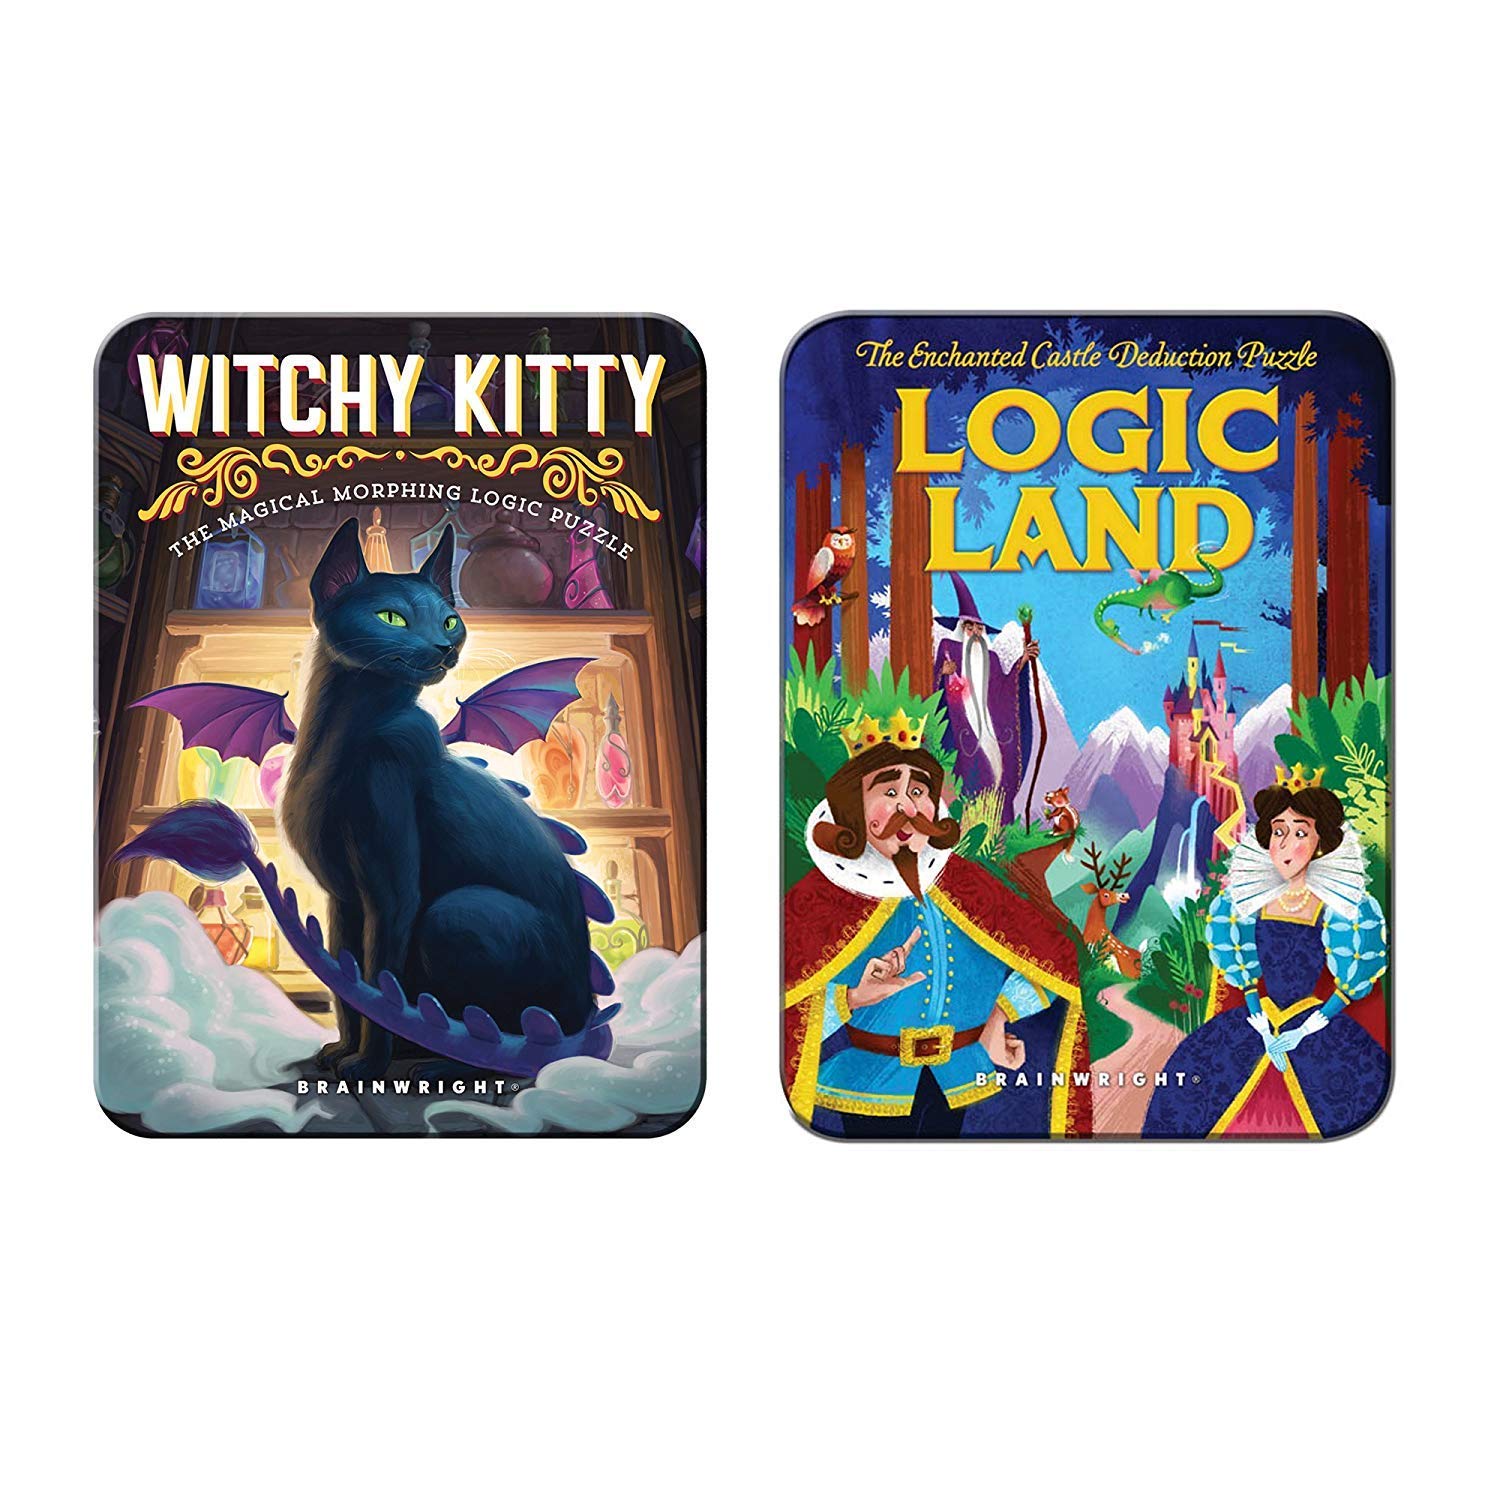 Logic Land and Witchy Kitty travel logic puzzles